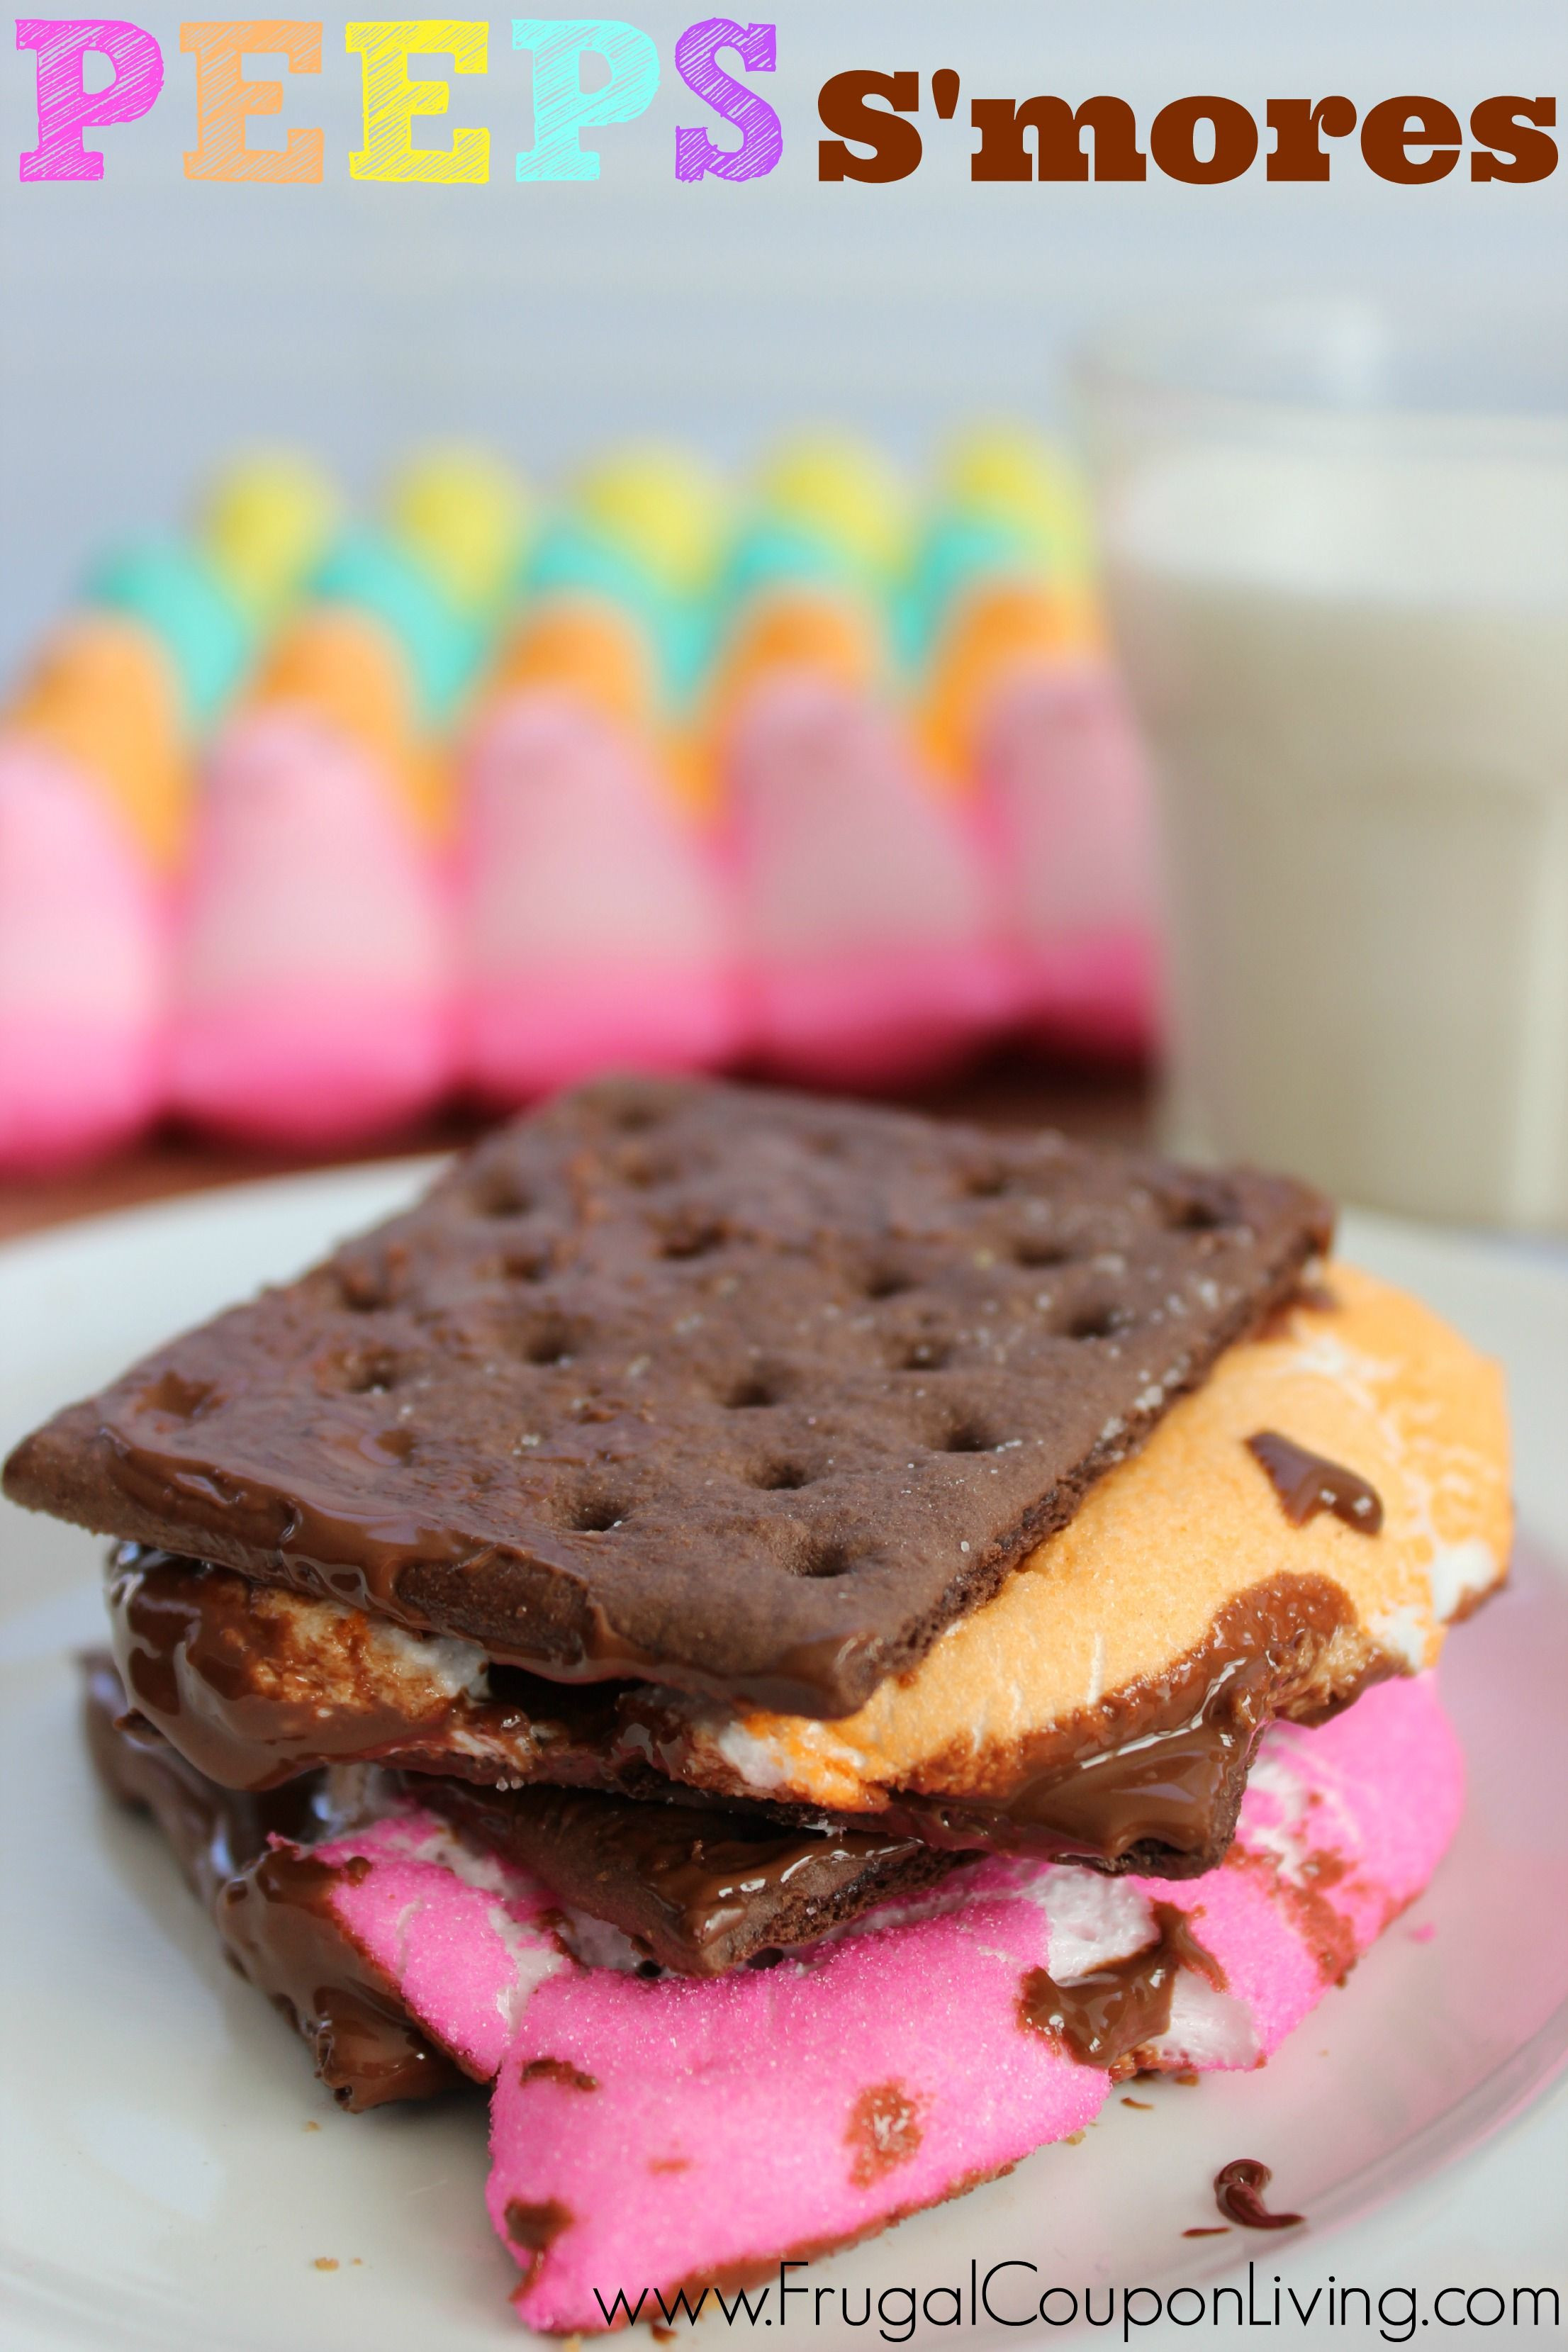 Chocolate Easter Desserts
 Peeps S Mores Recipe Chocolate Marshmallow Dessert for